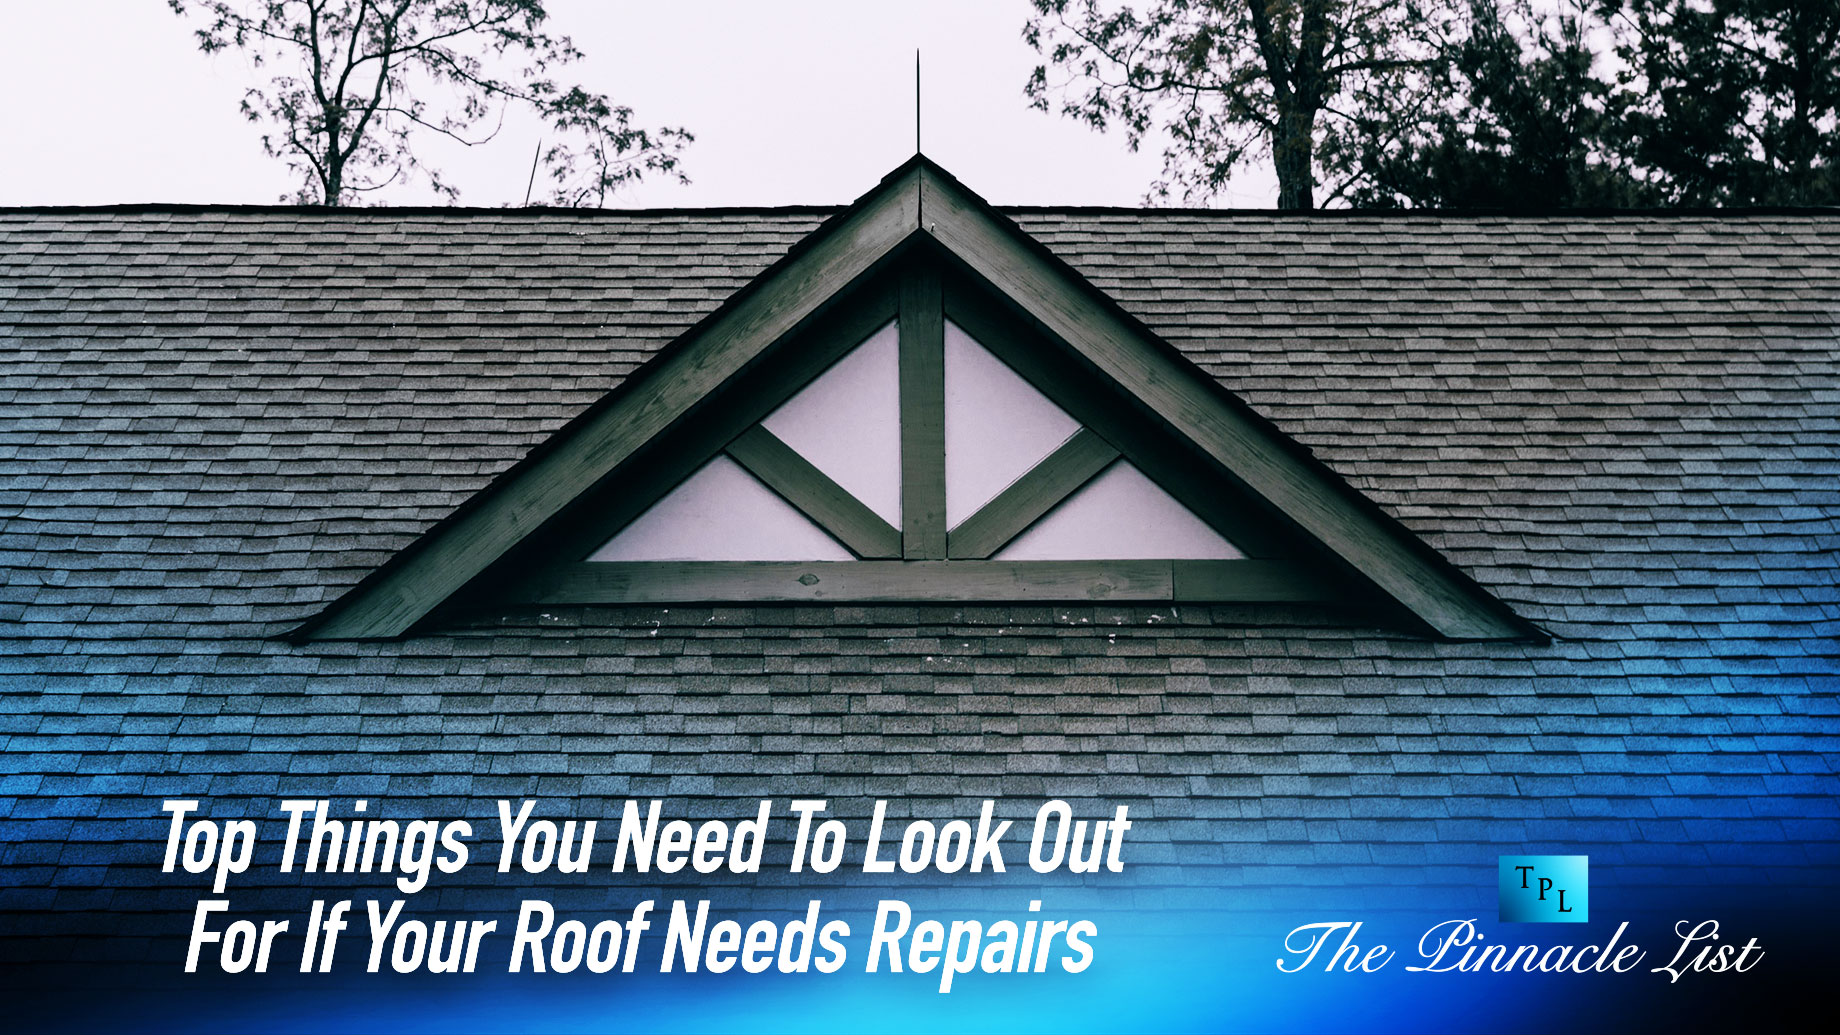 Top Things You Need To Look Out For If Your Roof Needs Repairs